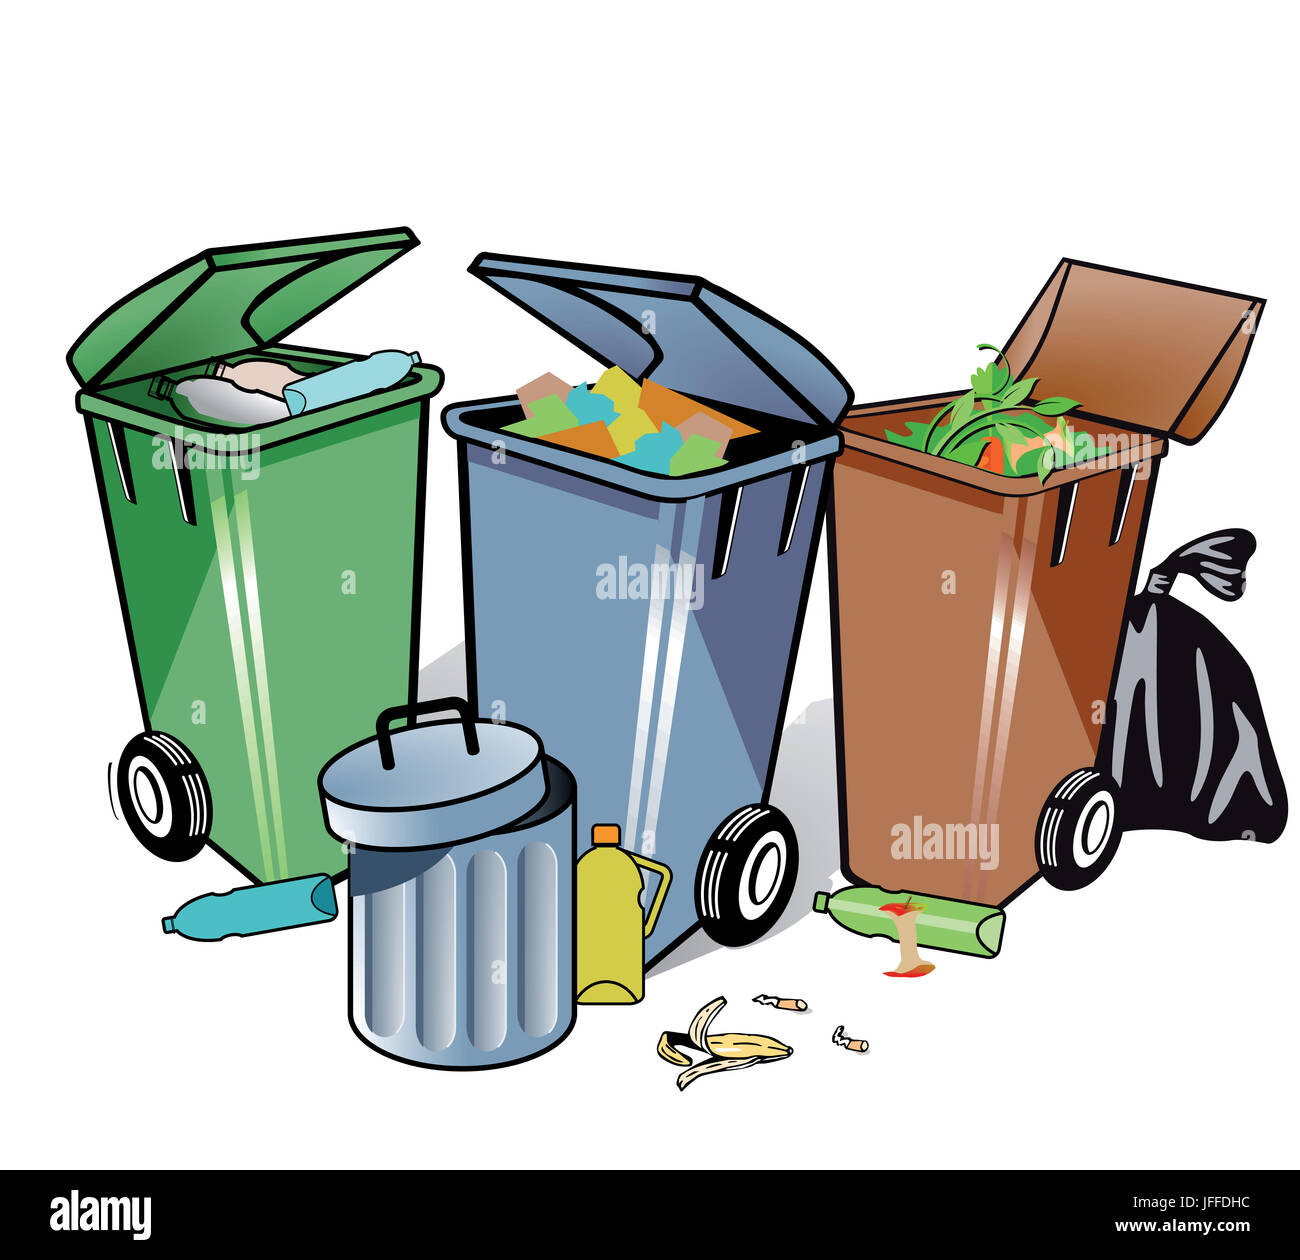 Trash Can and Garbage illustration Stock Photo